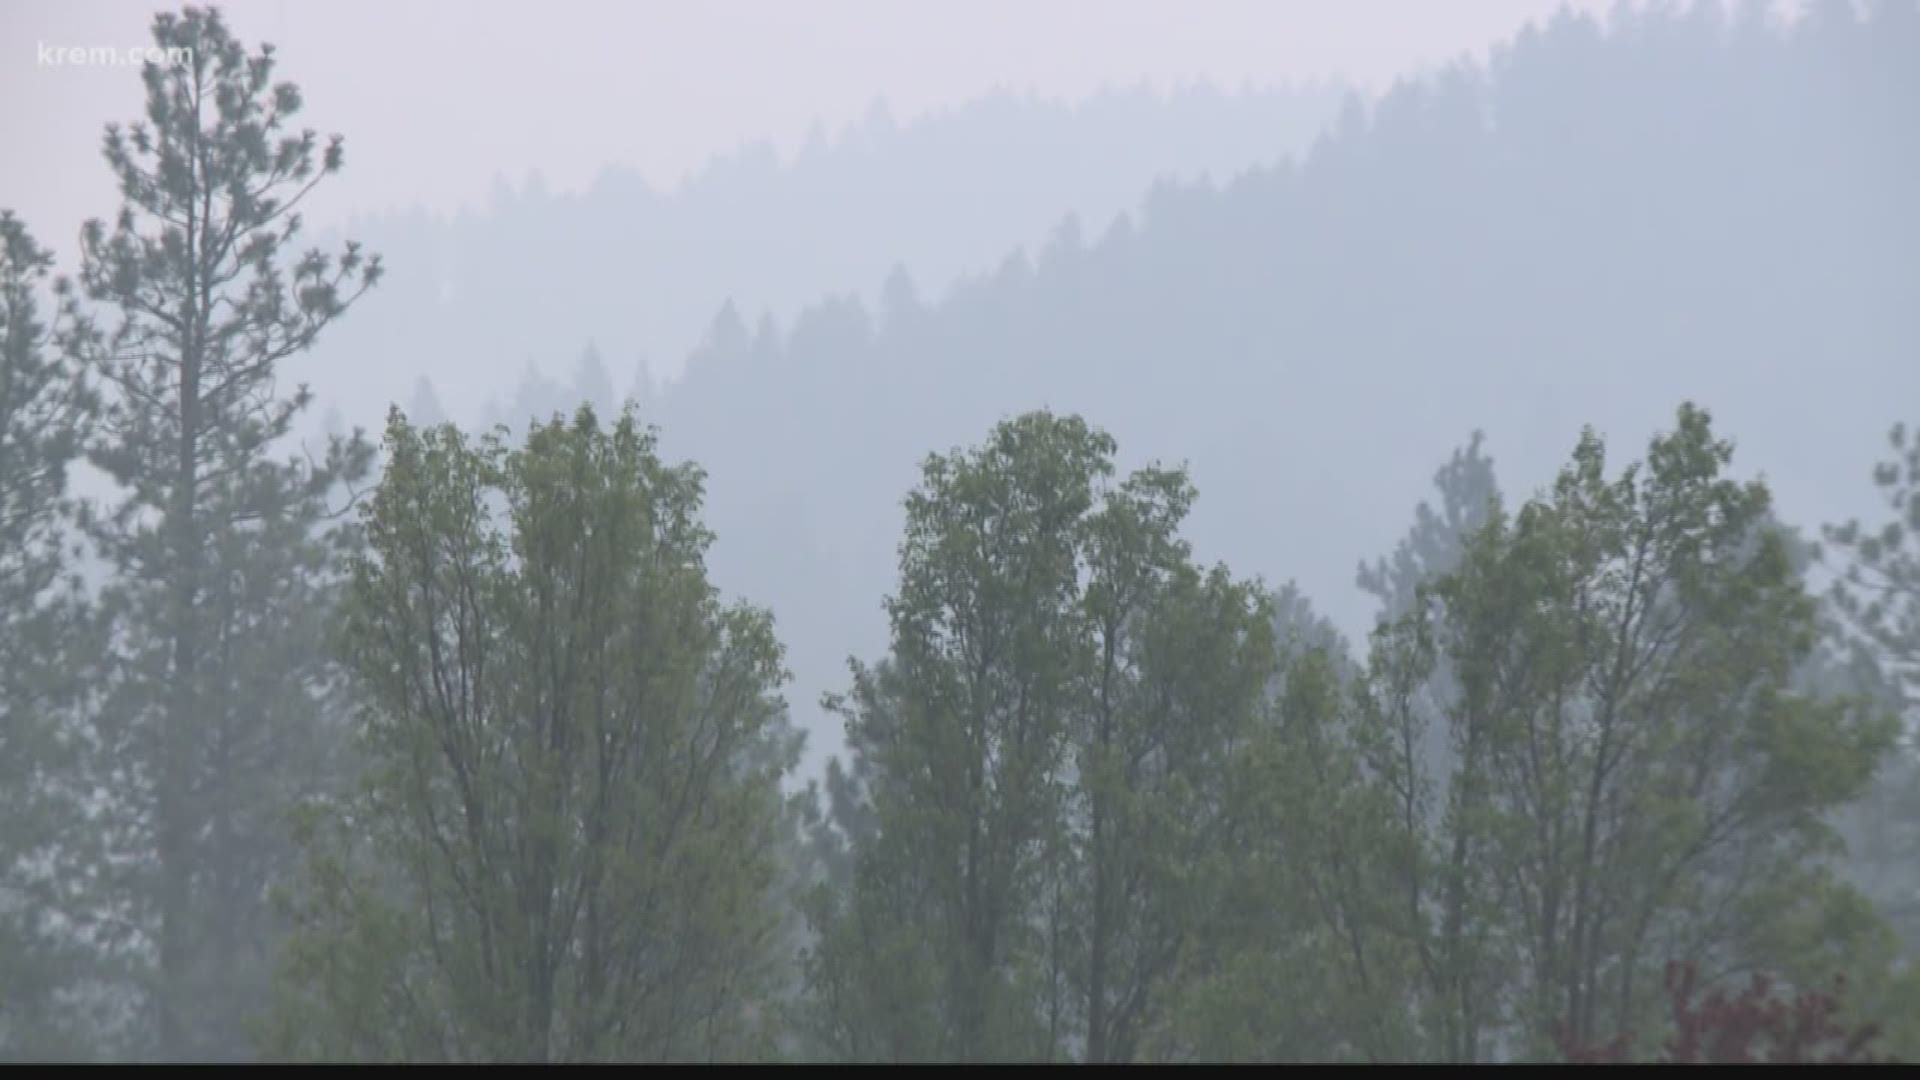 The air quality index across the Inland Northwest dropped by more than half thanks to high winds and some showers across the region.